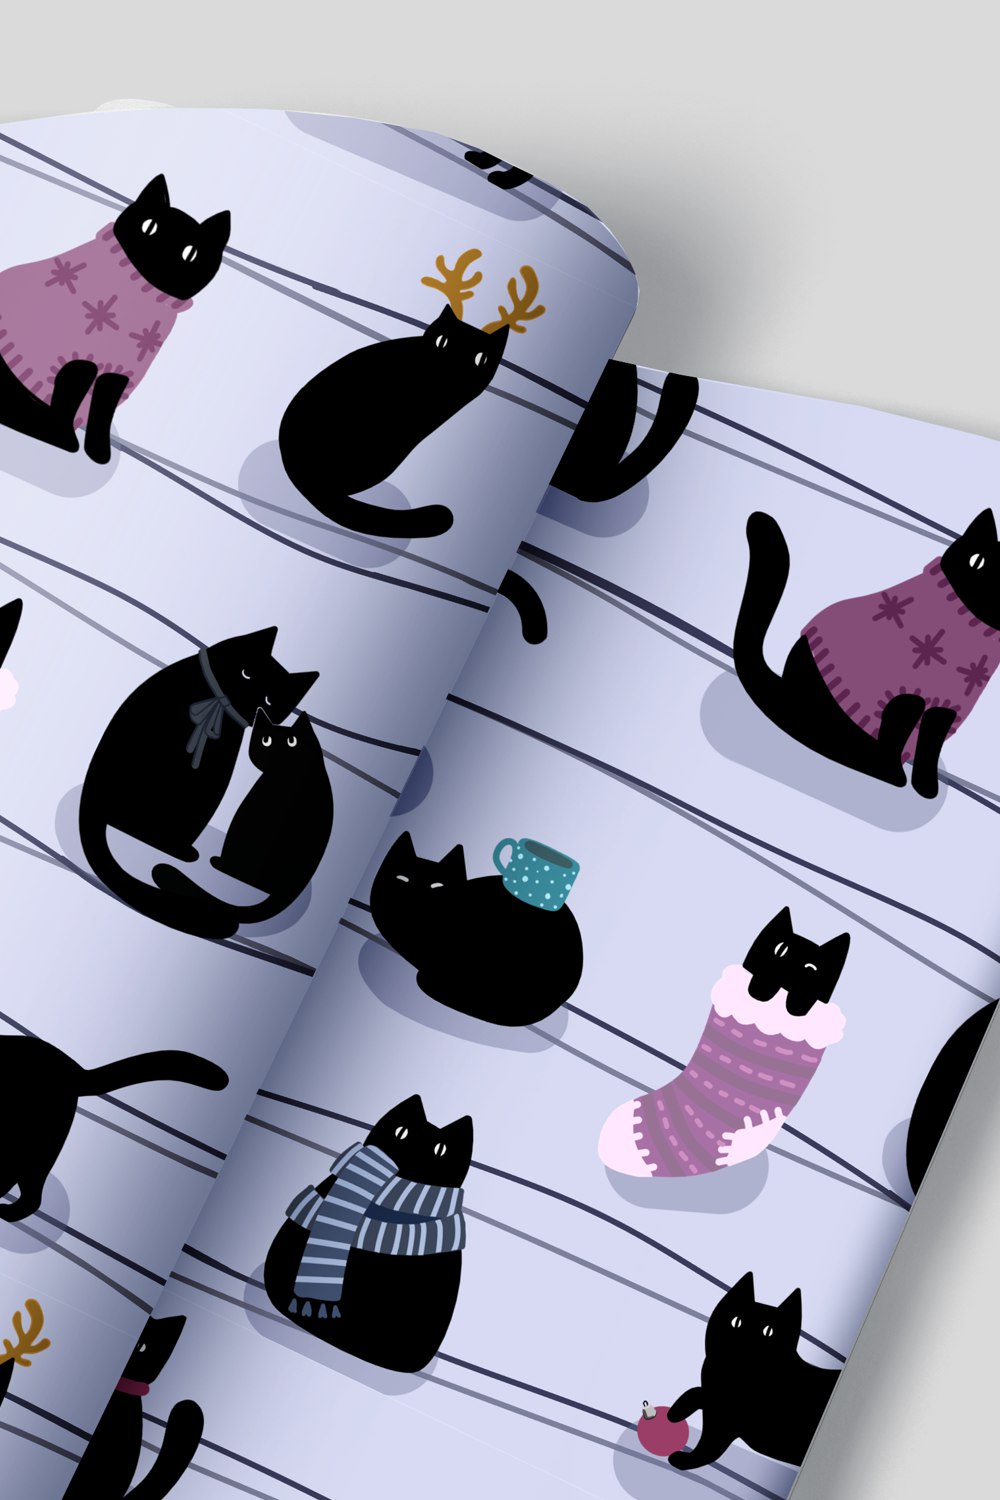 A Christmas pattern with black cats pinterest preview image.